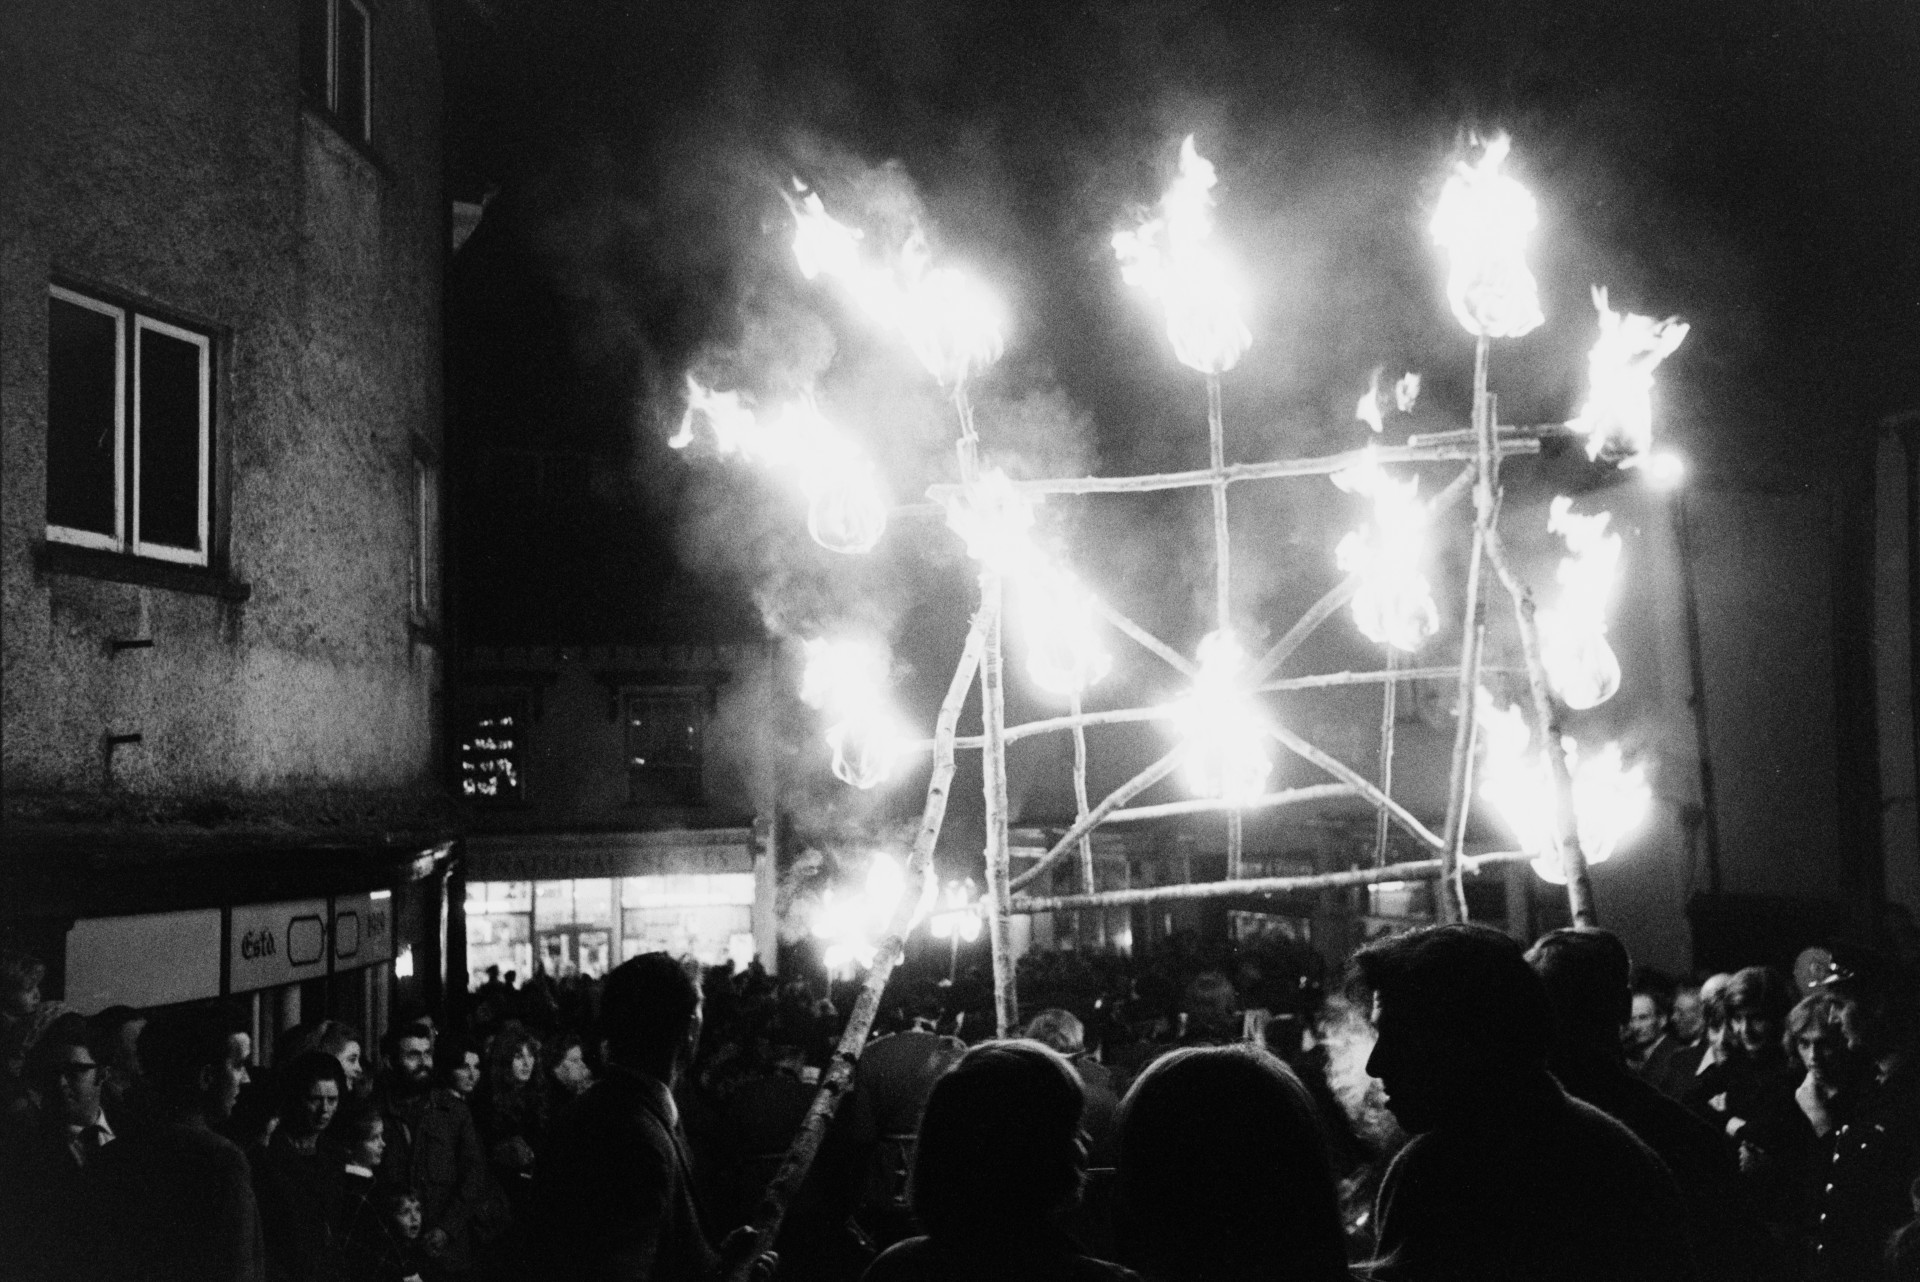 Spectators watching people carrying a wooden frame with flaming torches, in a torchlight procession through a street with shop fronts at Hatherleigh Carnival, at night.